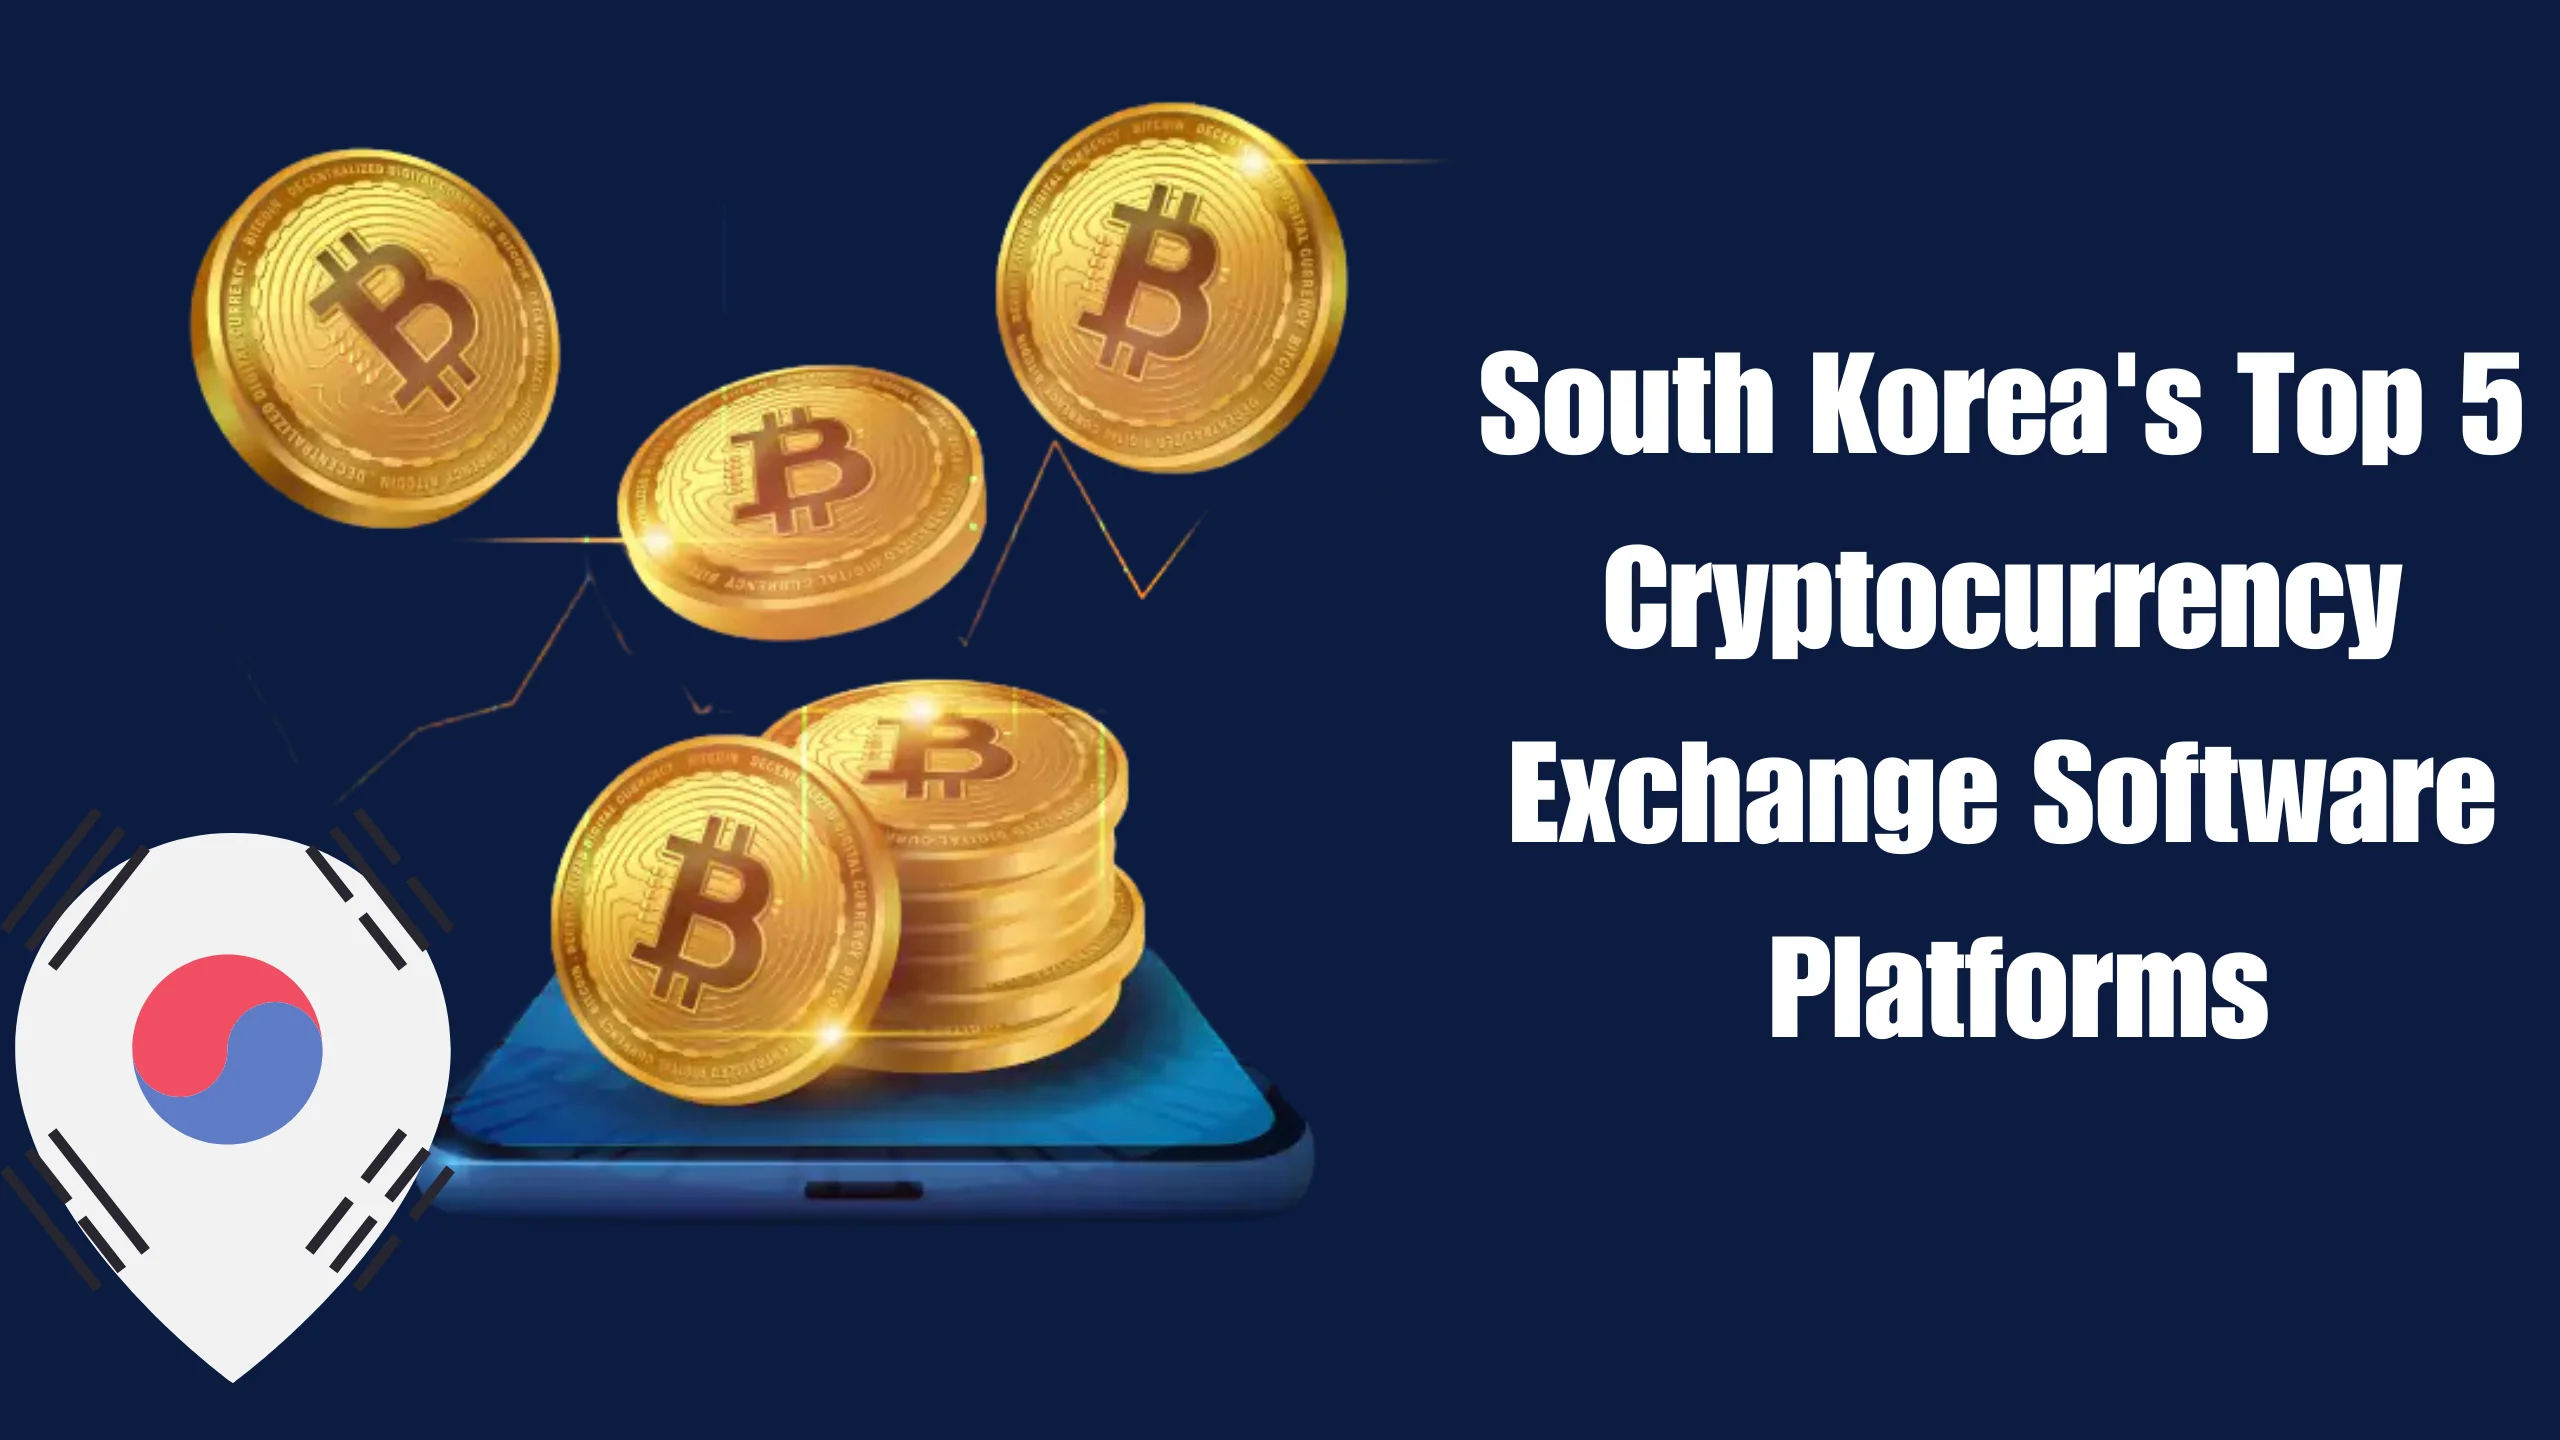 A comparative analysis chart of South Korea's top 5 cryptocurrency exchange software platforms for 2022, showcasing features and performance metrics.